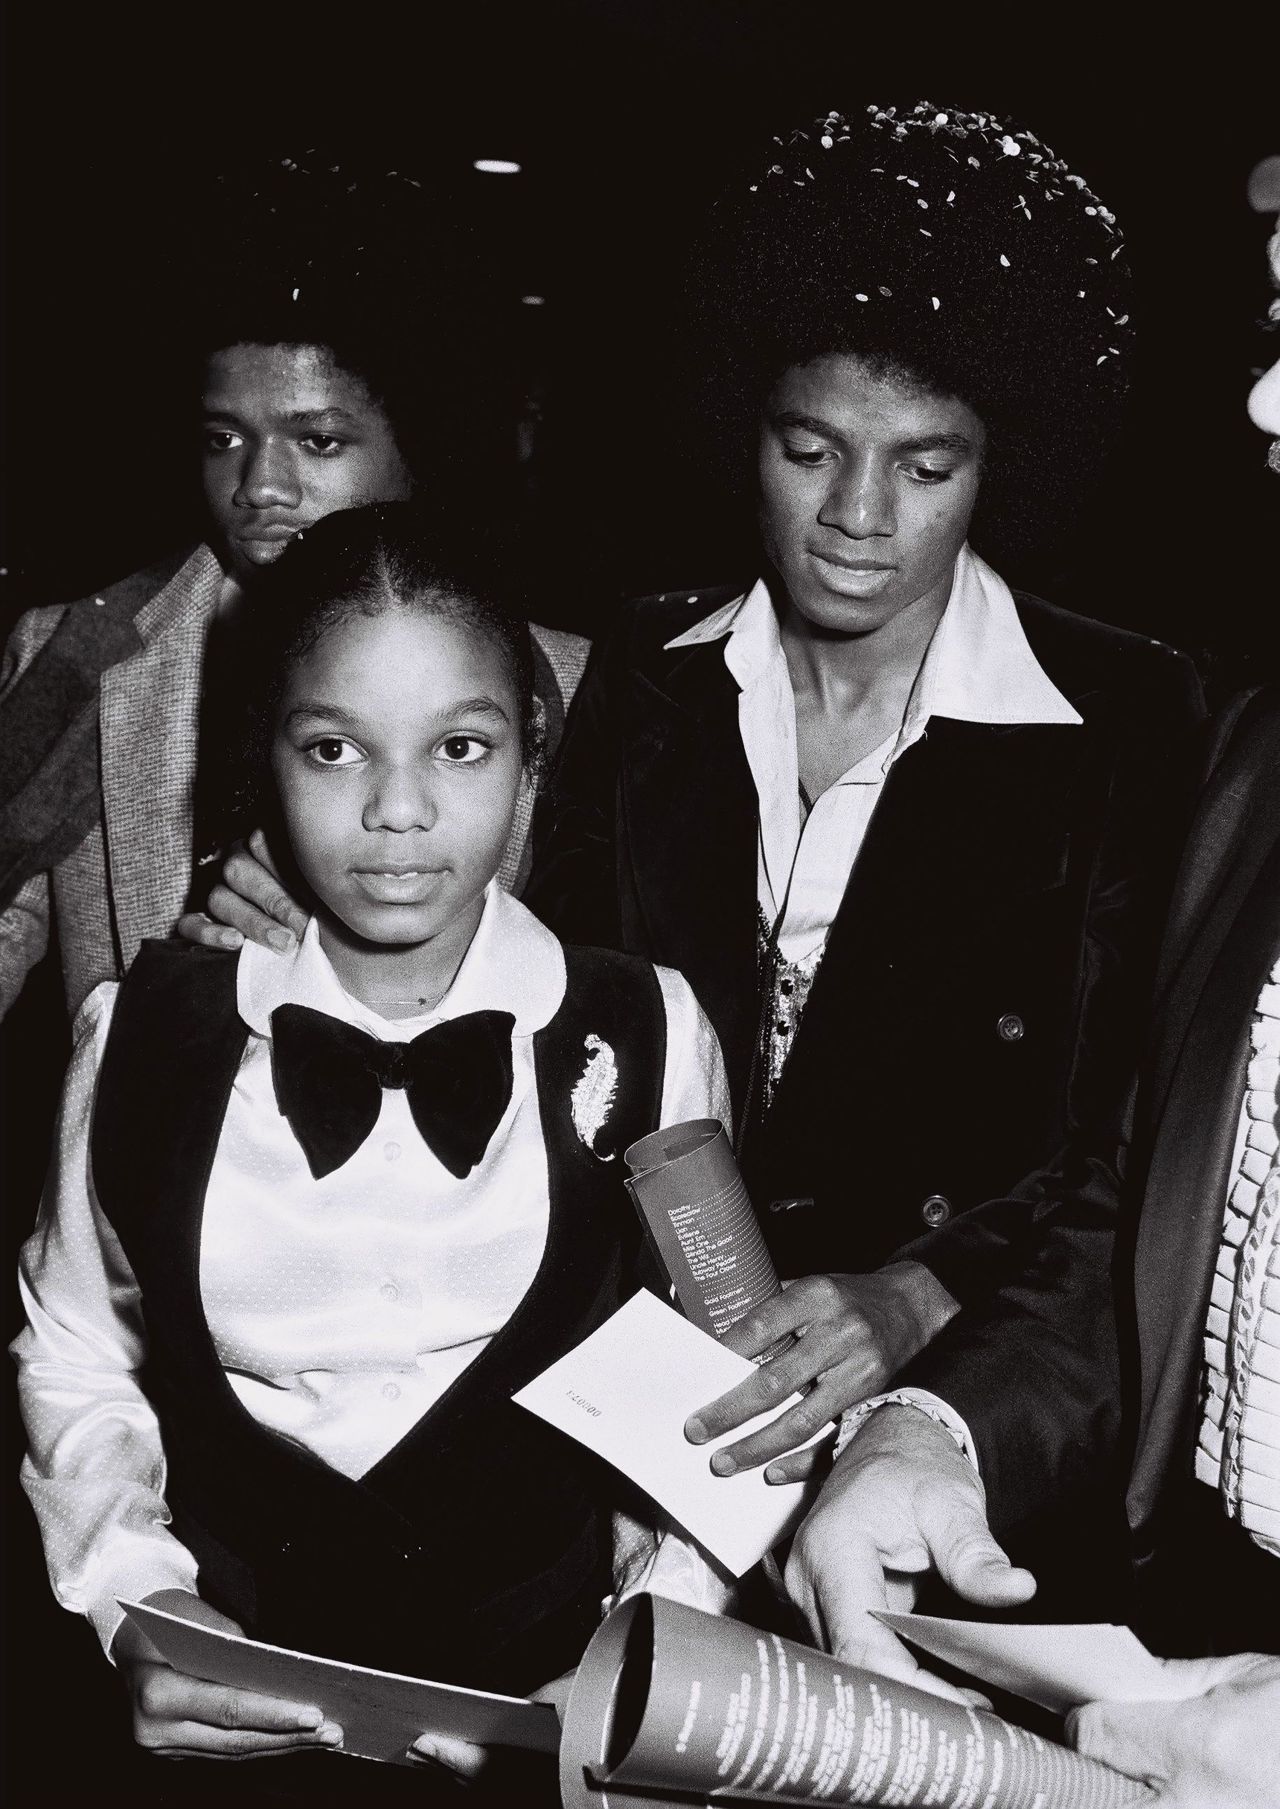 Janet Jackson and Michael Jackson attend the premiere of "The Wiz" in 1978. The two started off as child superstars and grew into music icons.